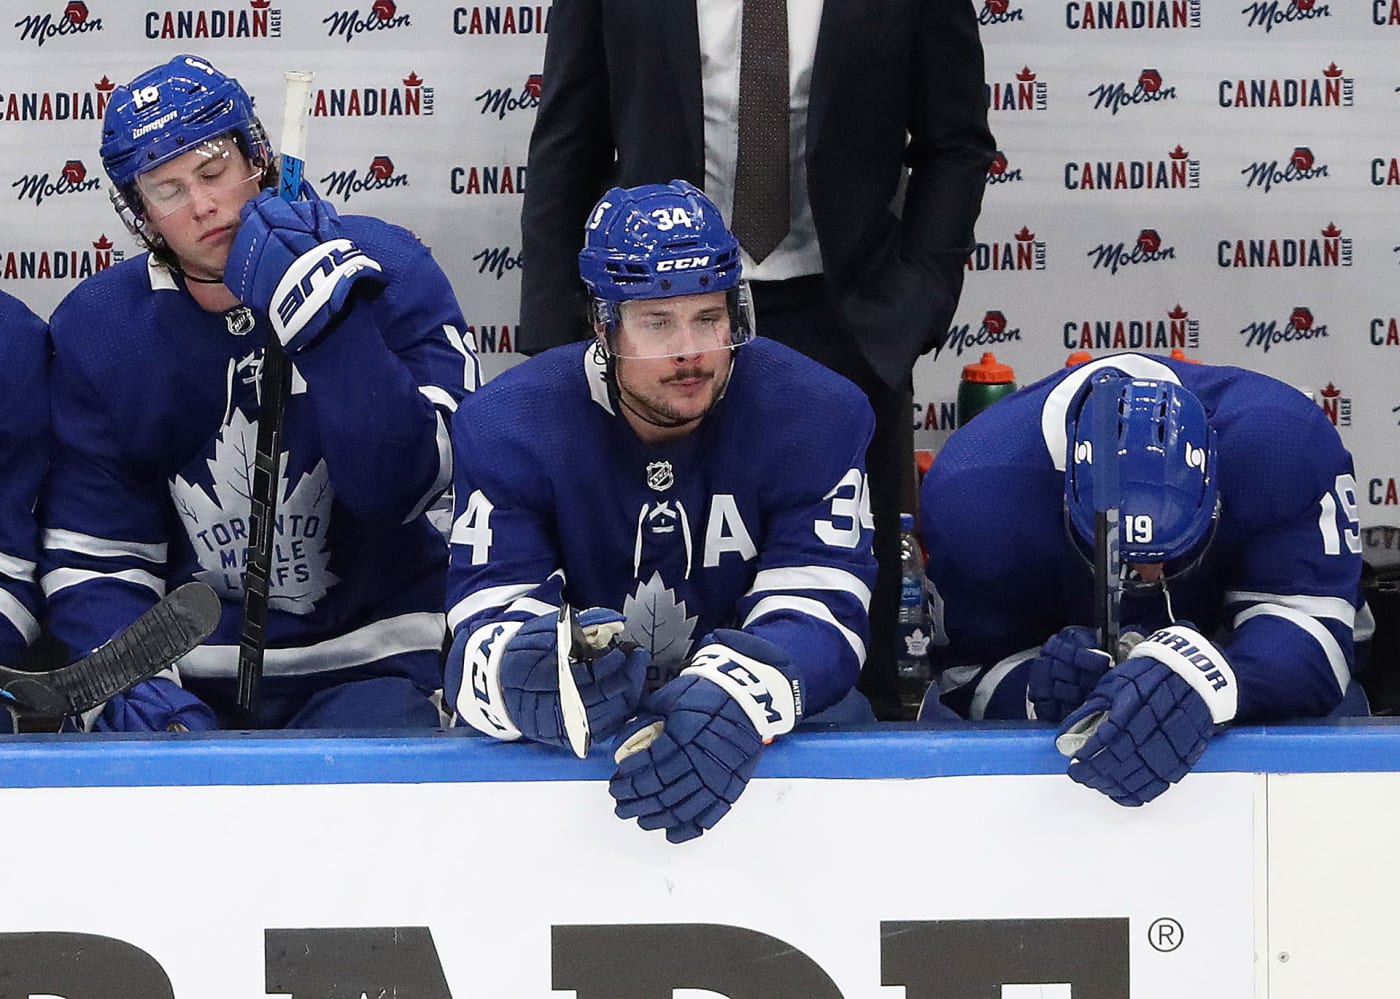 Toronto Maple Leafs first round exit, Maple Leafs first round, Maple leafs first round loss. Matthews and Marner disappointed at another series loss.